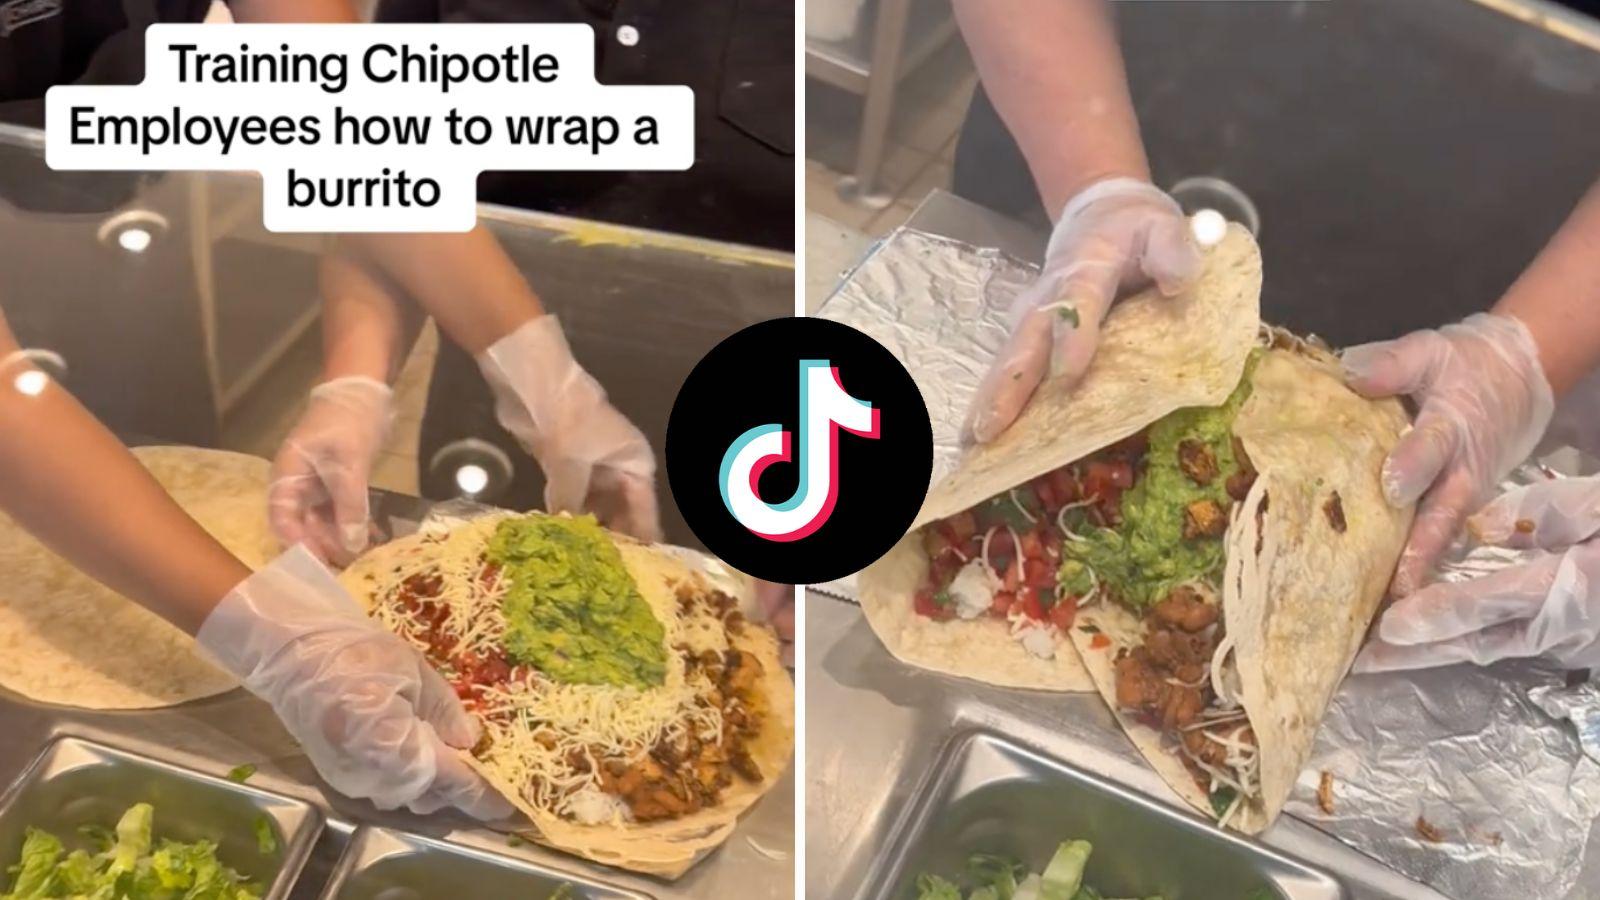 Chipotle customer divides viewers after "training" employees how to wrap burrito